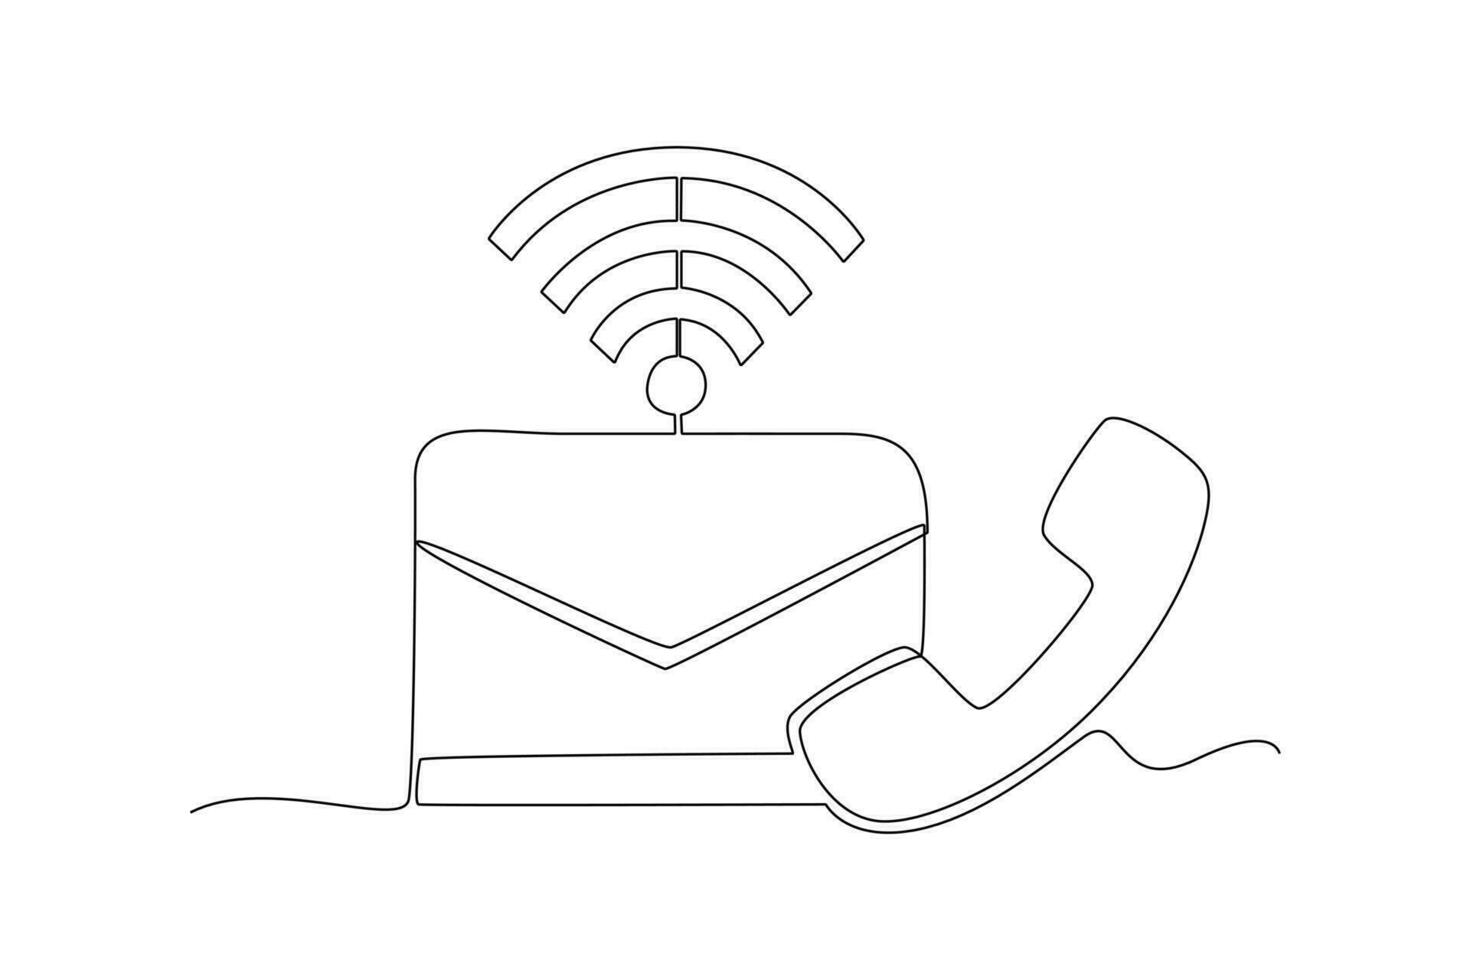 One continuous line drawing of Information technology concept. Doodle vector illustration in simple linear style.